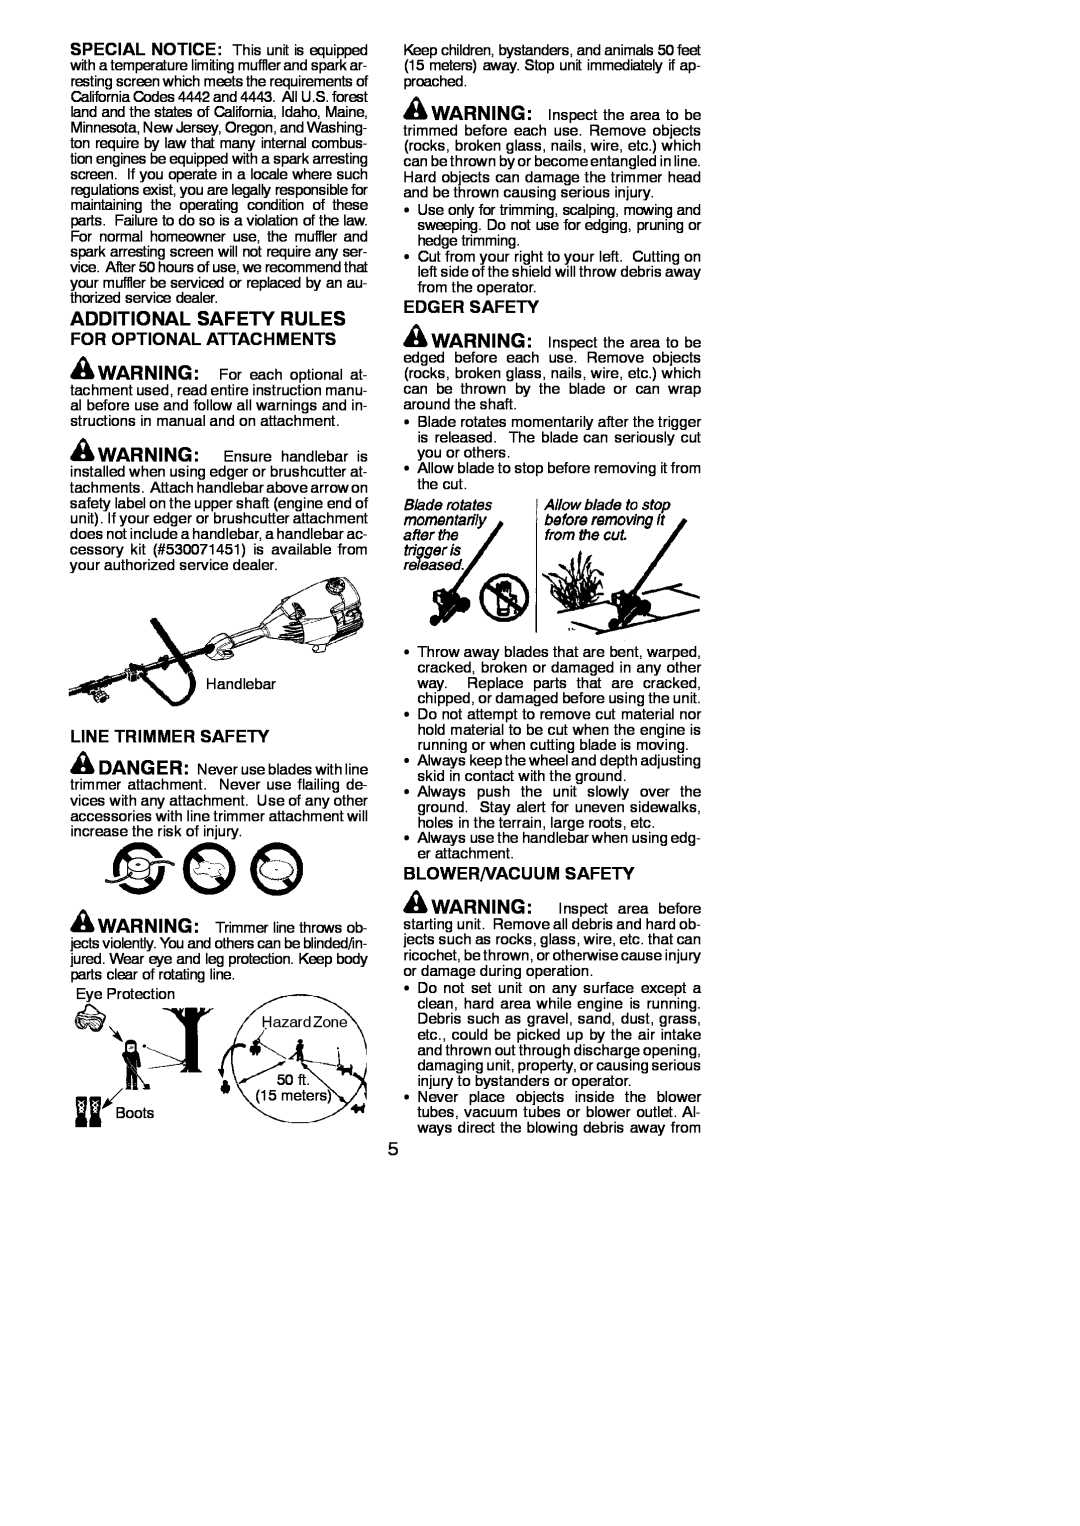 Poulan 545137281 instruction manual Additional Safety Rules, For Optional Attachments, Edger Safety, Line Trimmer Safety 